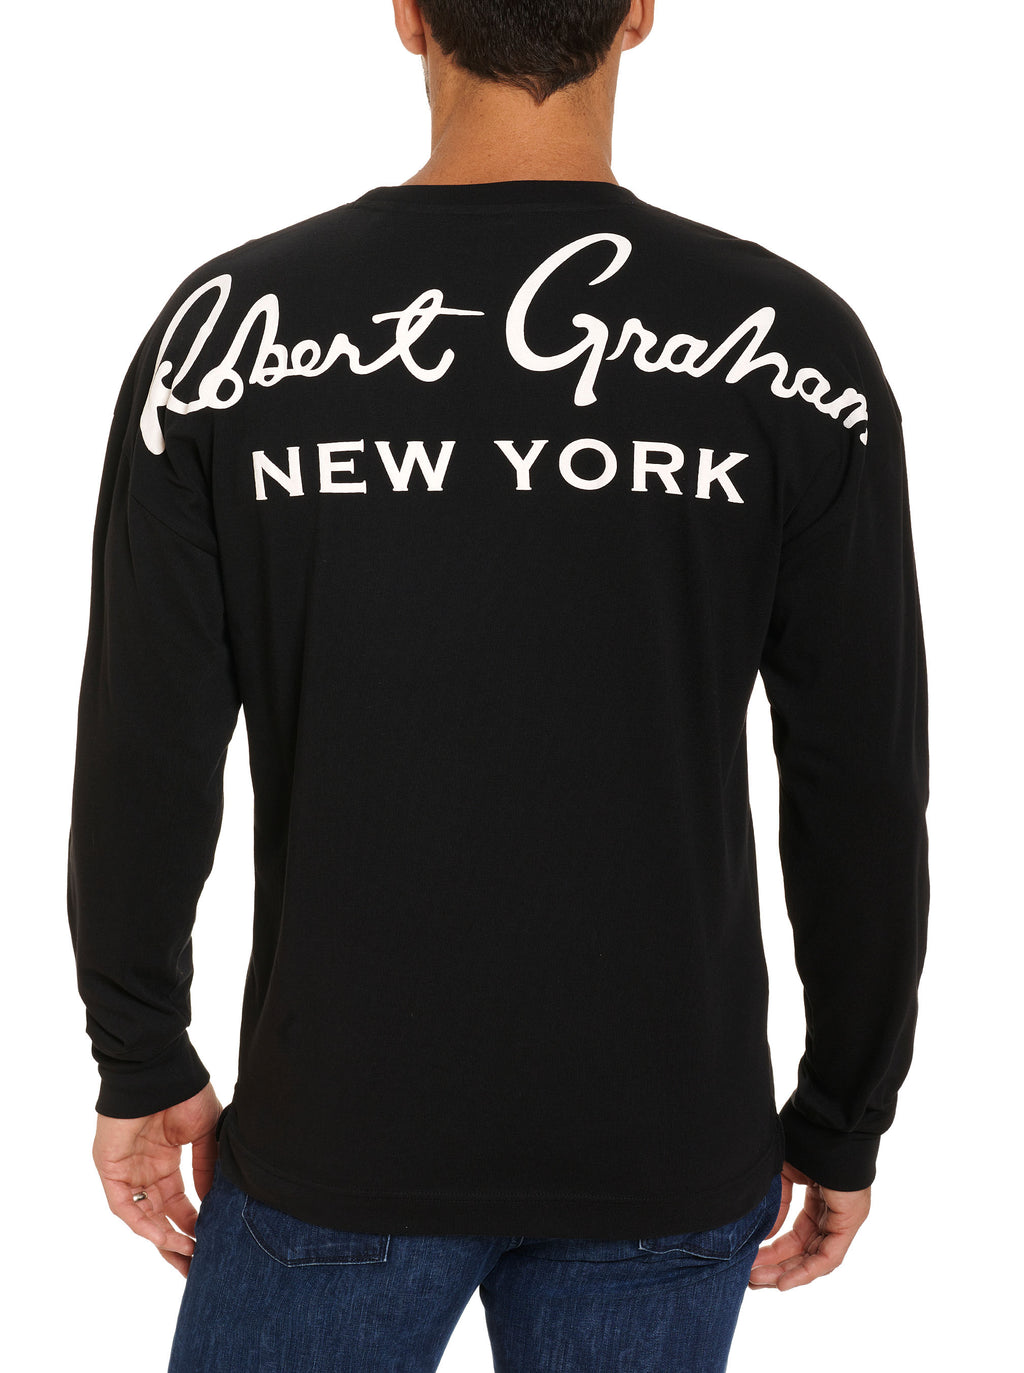 Chrome Hearts New York Exclusive L/S T-Shirt Black for Men